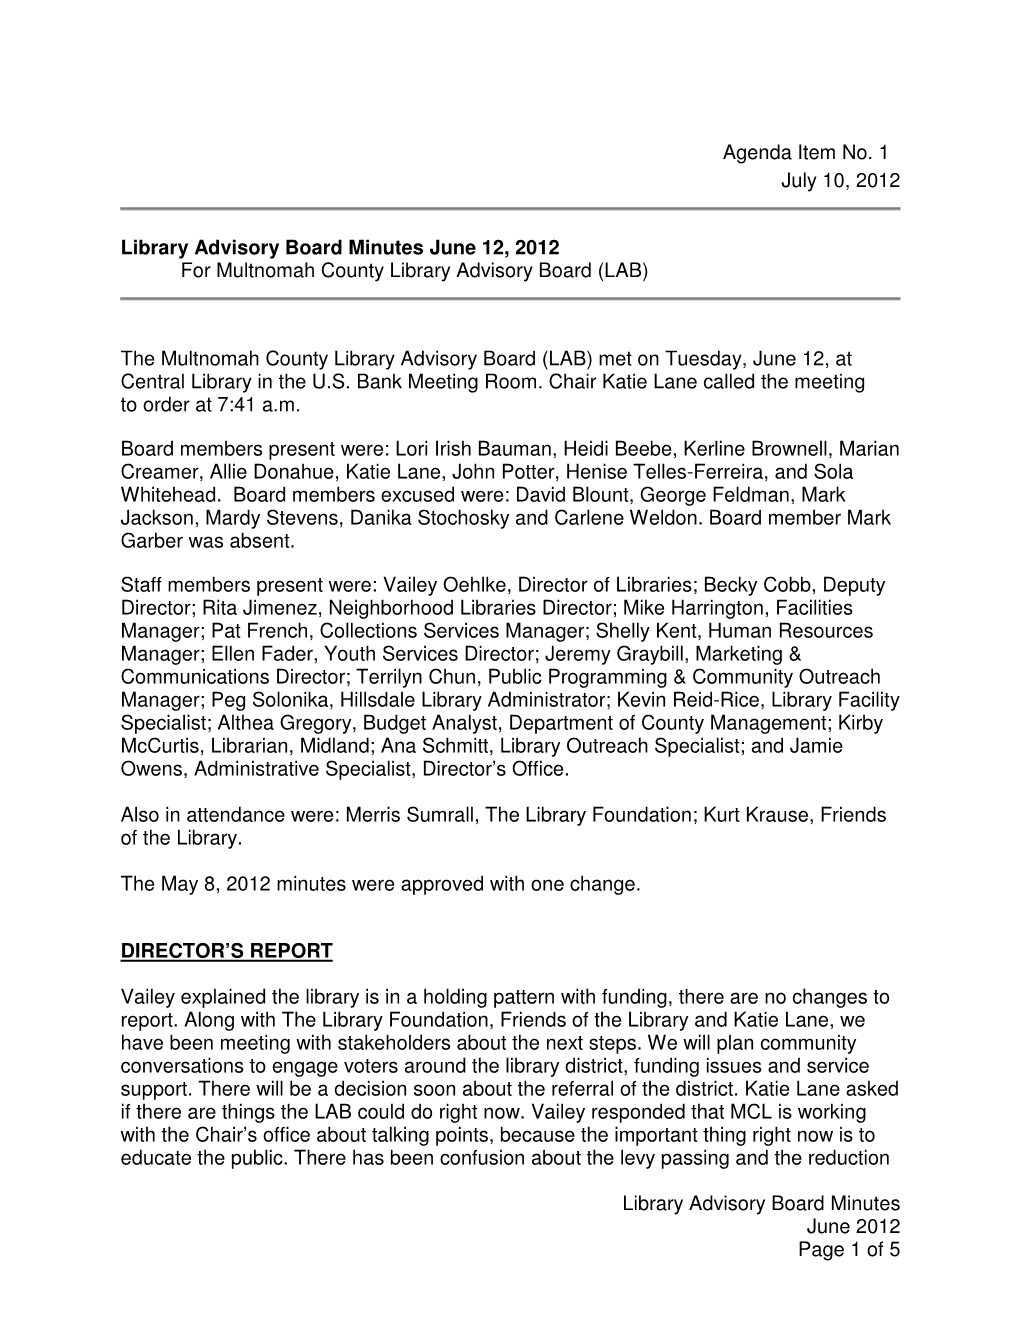 Minutes June 12, 2012 for Multnomah County Library Advisory Board (LAB)